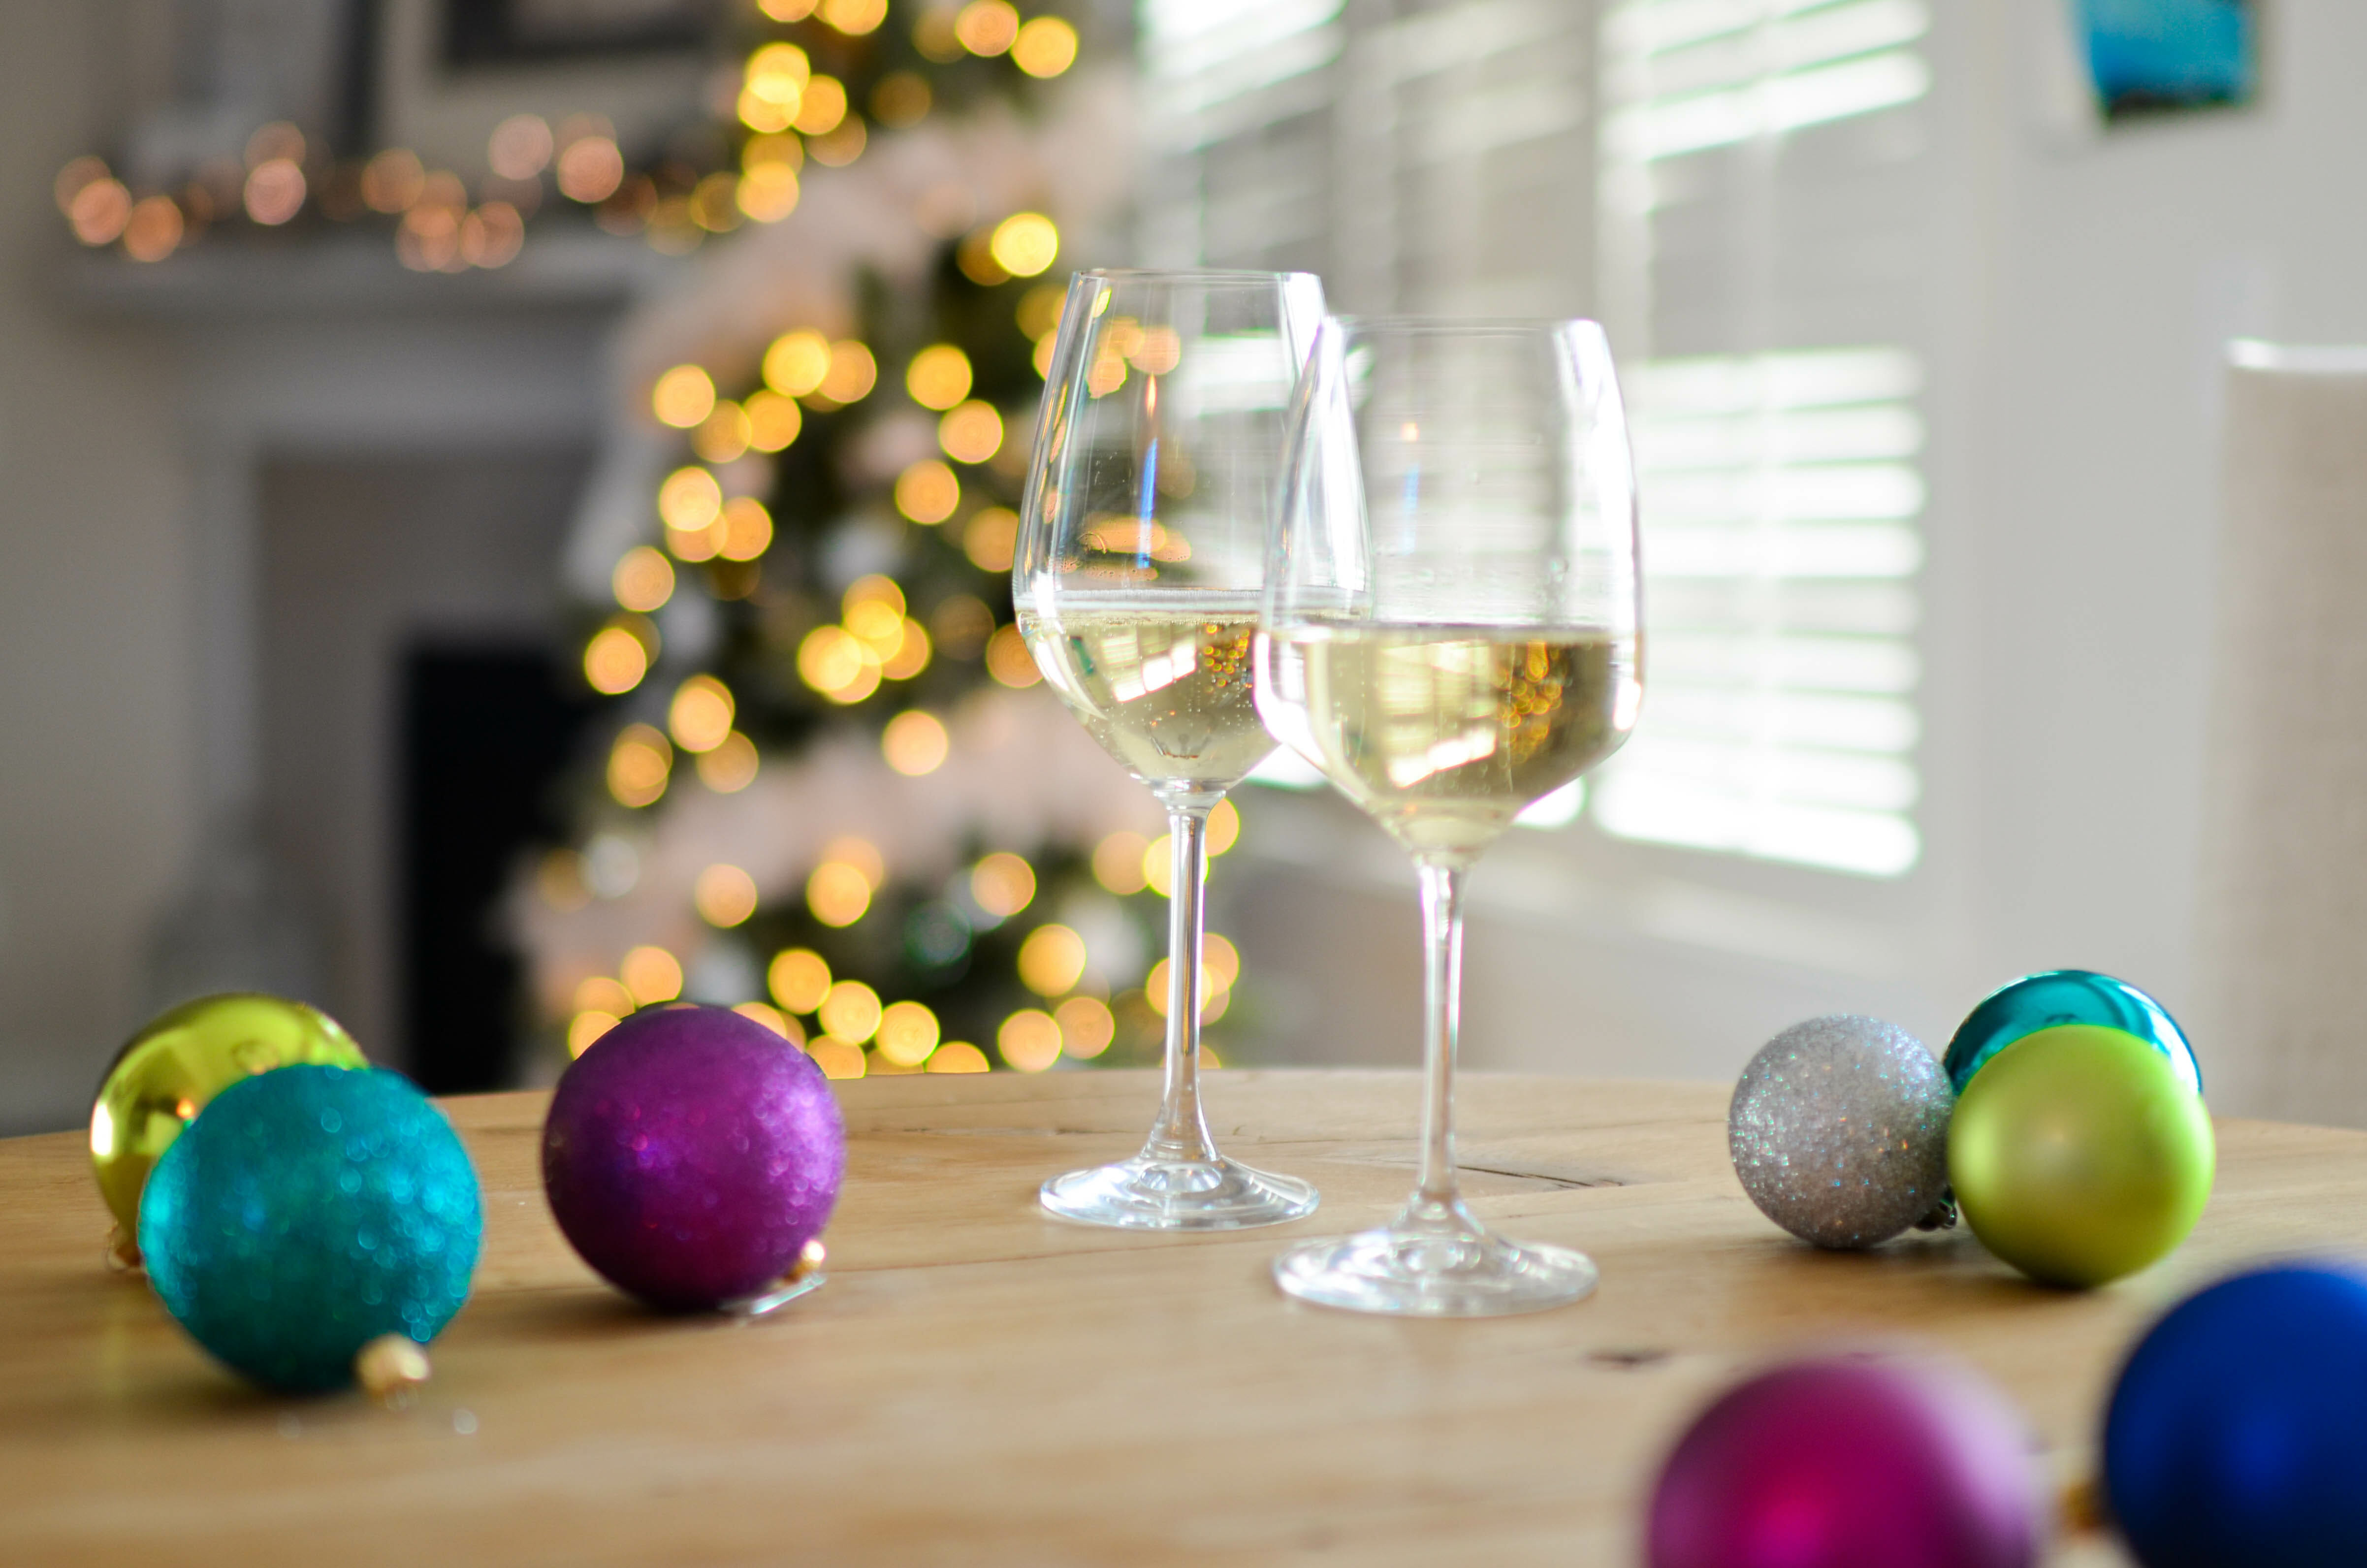 Photo by Element5 Digital from Pexels https://www.pexels.com/photo/two-champagne-glasses-near-baubles-712324/